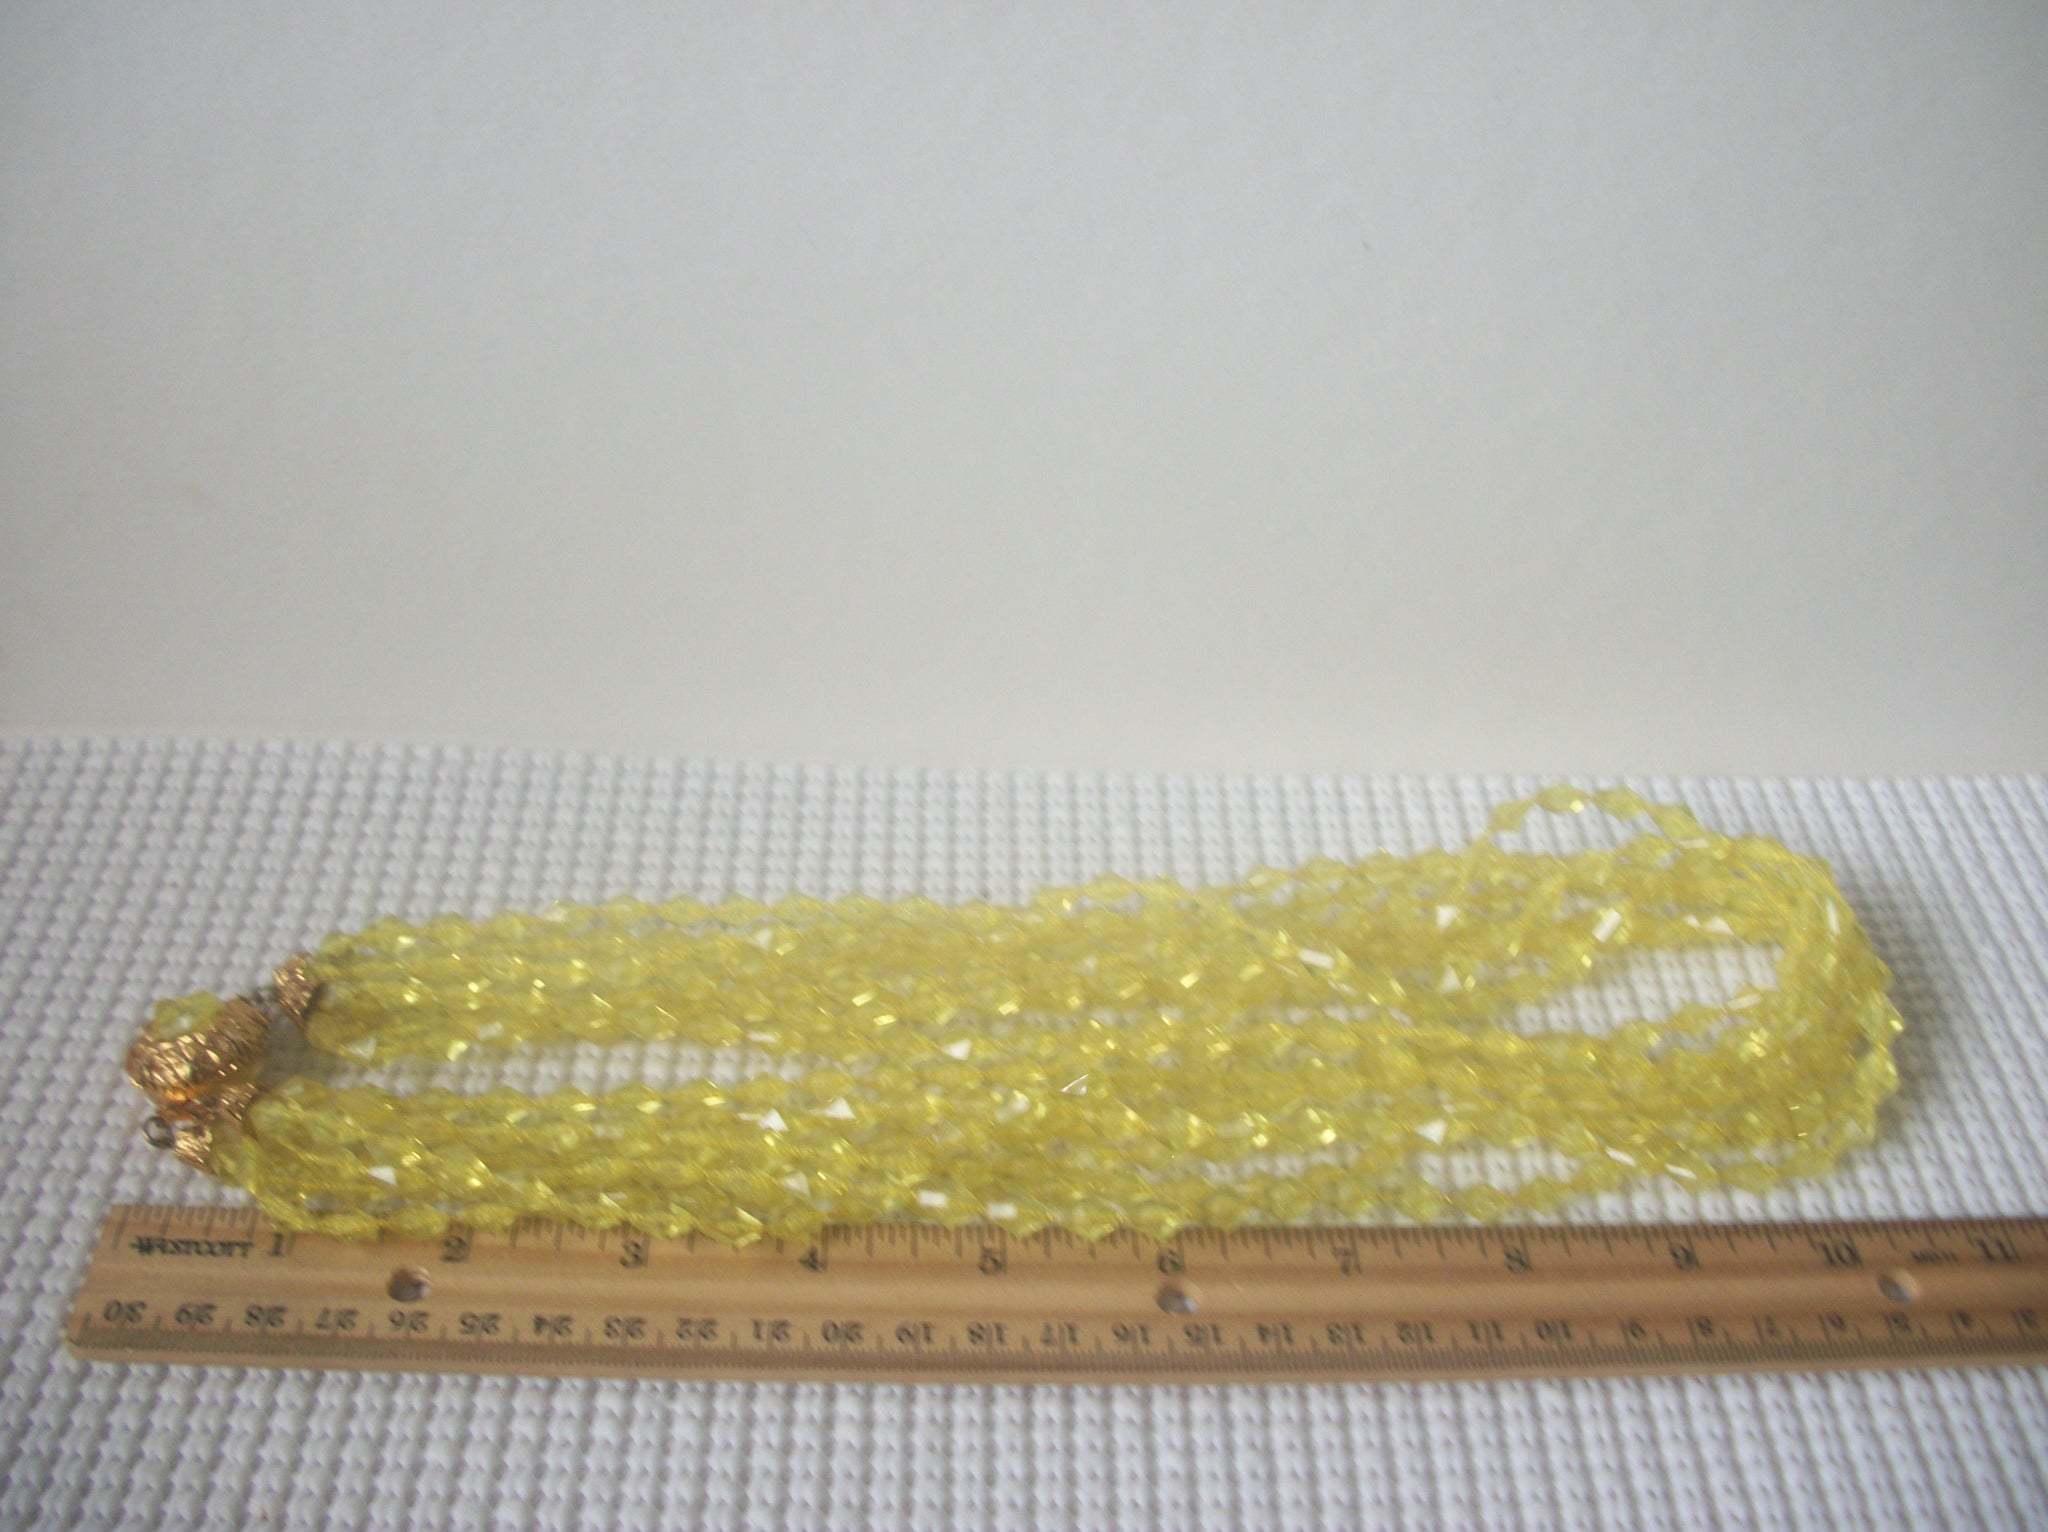 Chunky Multi Strand Necklace, Yellow Translucent Old Plastic 22" Long 82016